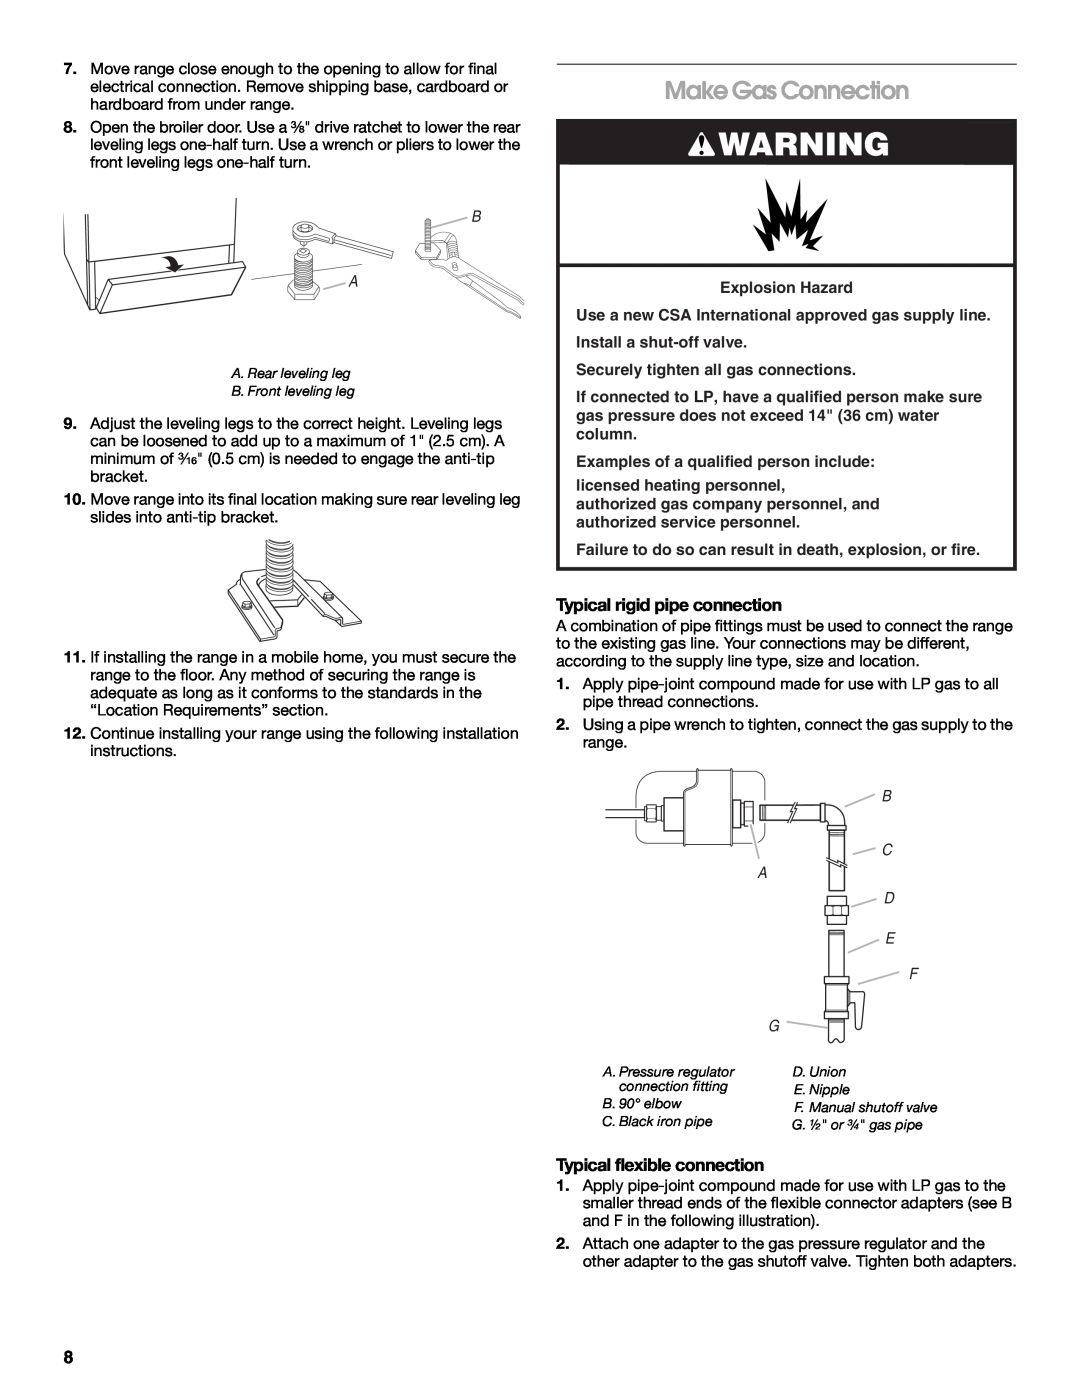 Amana W10130752B installation instructions Make Gas Connection, Typical rigid pipe connection, Typical flexible connection 